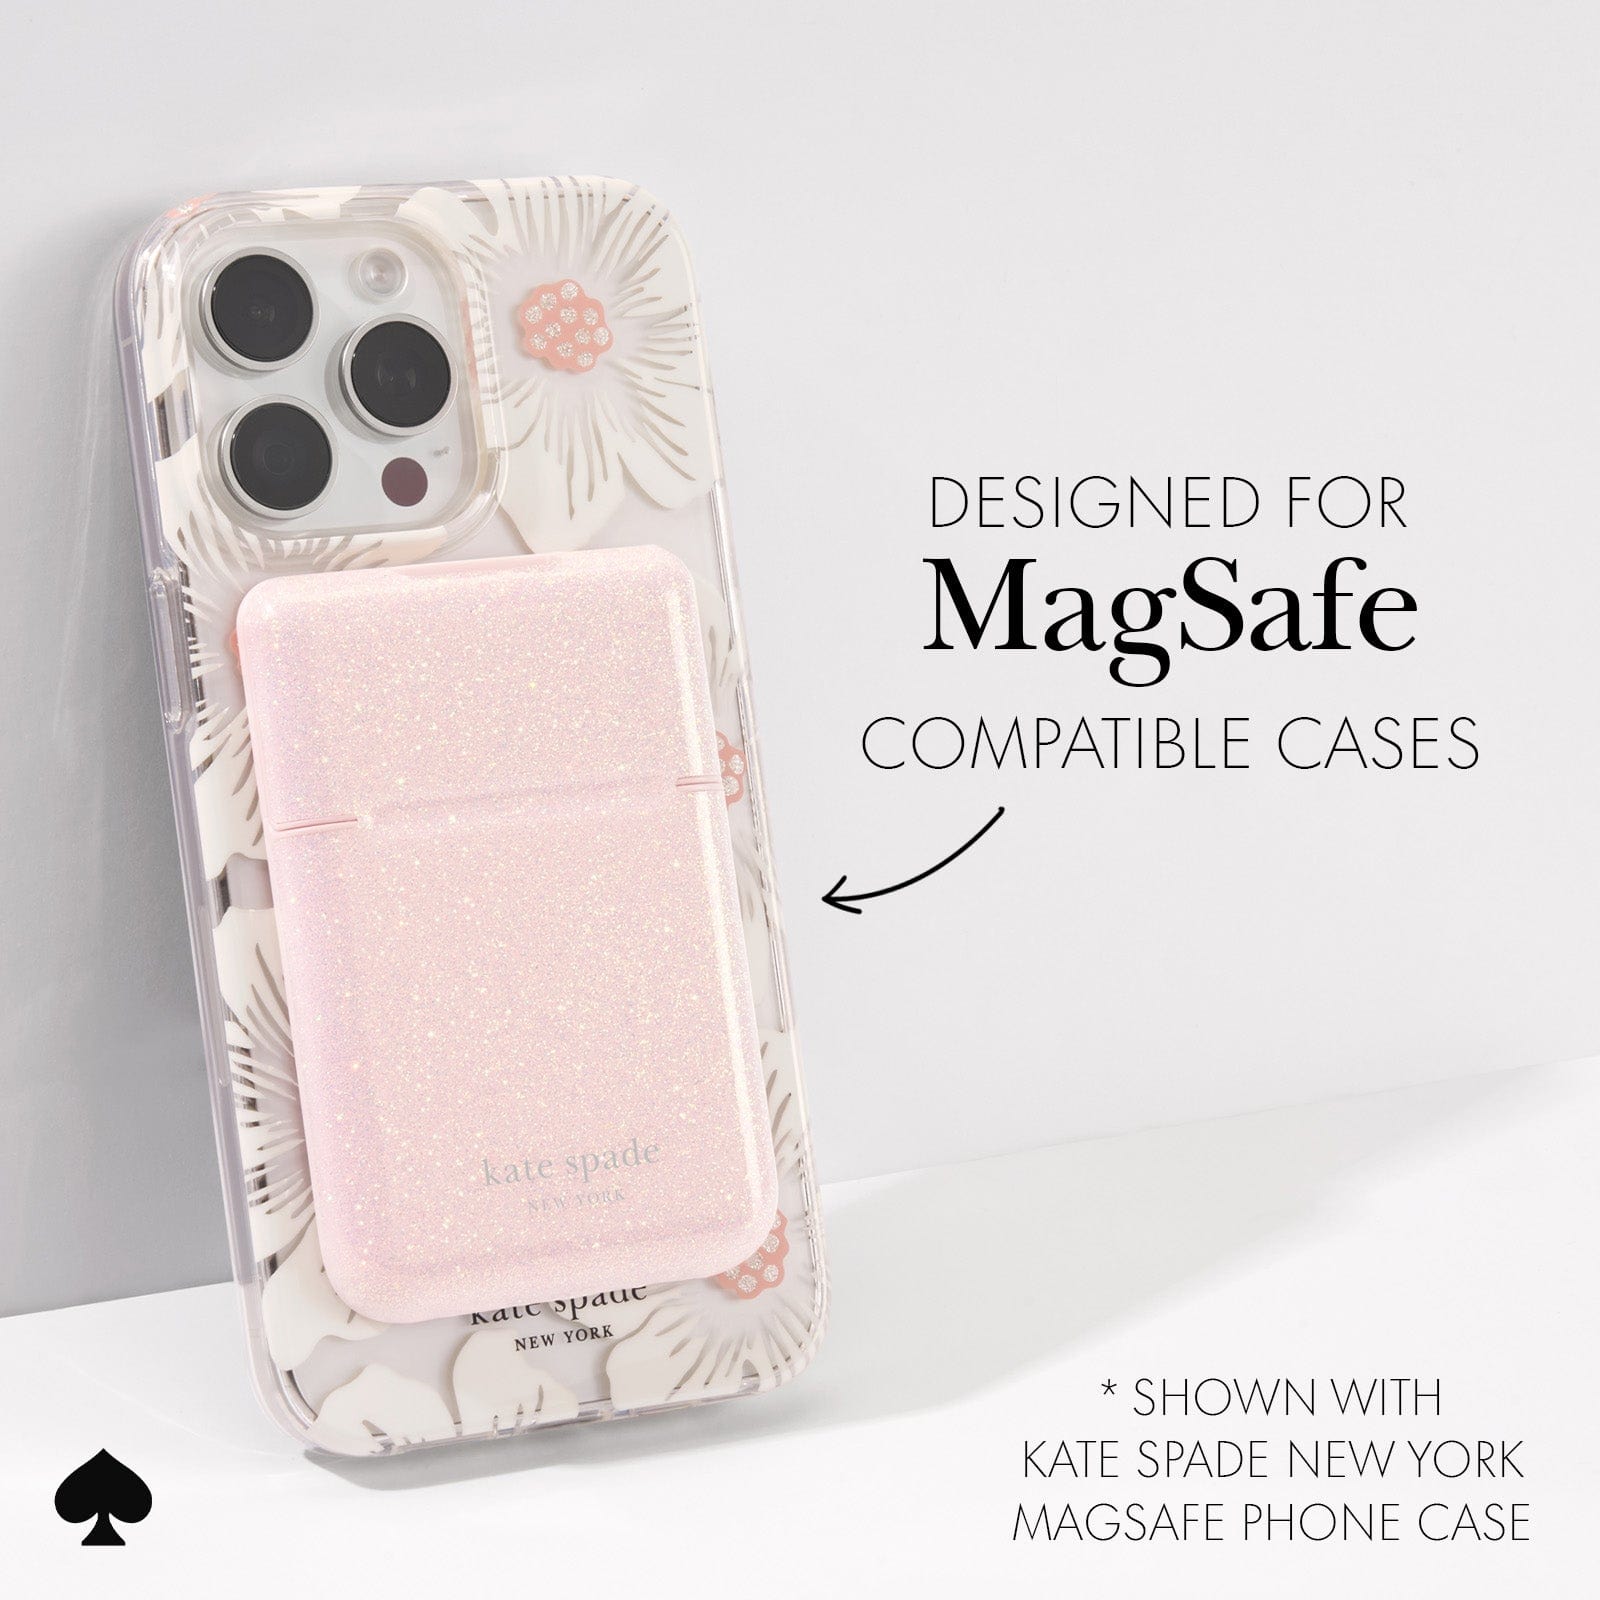 DESIGNED FOR MAGSAFE COMPATIBLE CASES/ SHOWN WITH KATE SPADE NEW YORK MAGSAFE PHONE CASE